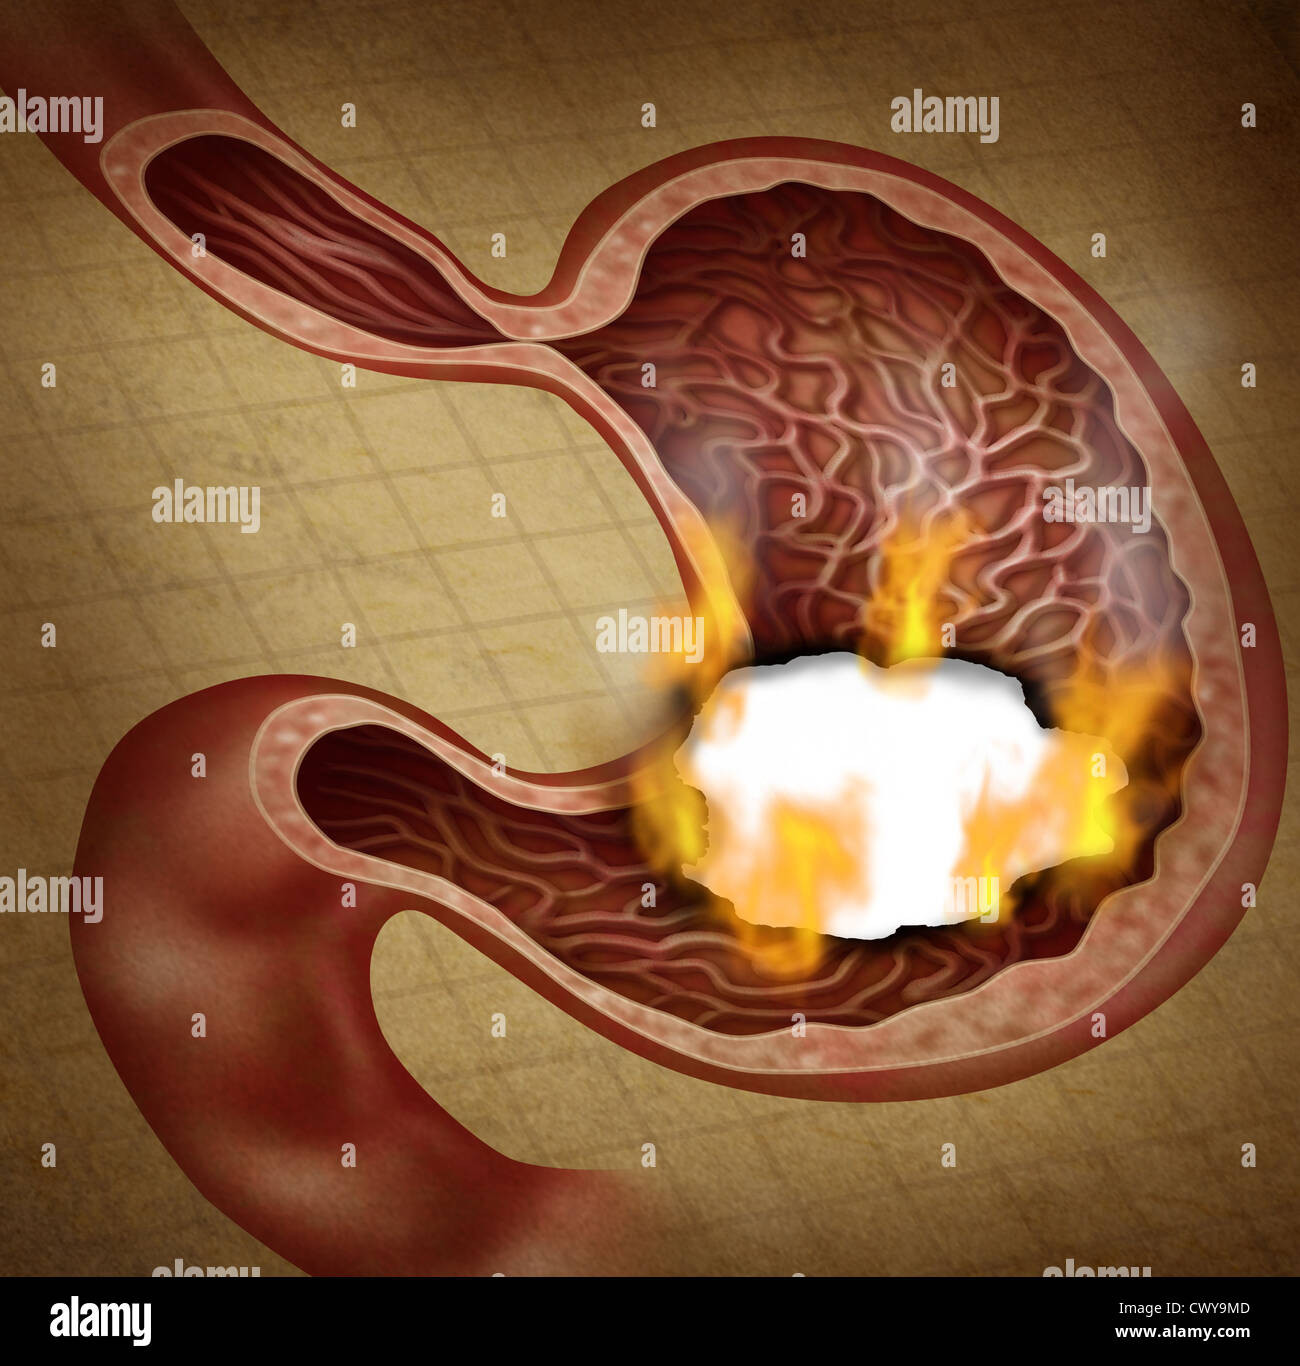 Stomach ulcer and burning indigestion pain in the digestive system with a medical illustration of the human digestion organ with a hole in the document that has a burn with flames as a health care symbol on a grunge texture. Stock Photo